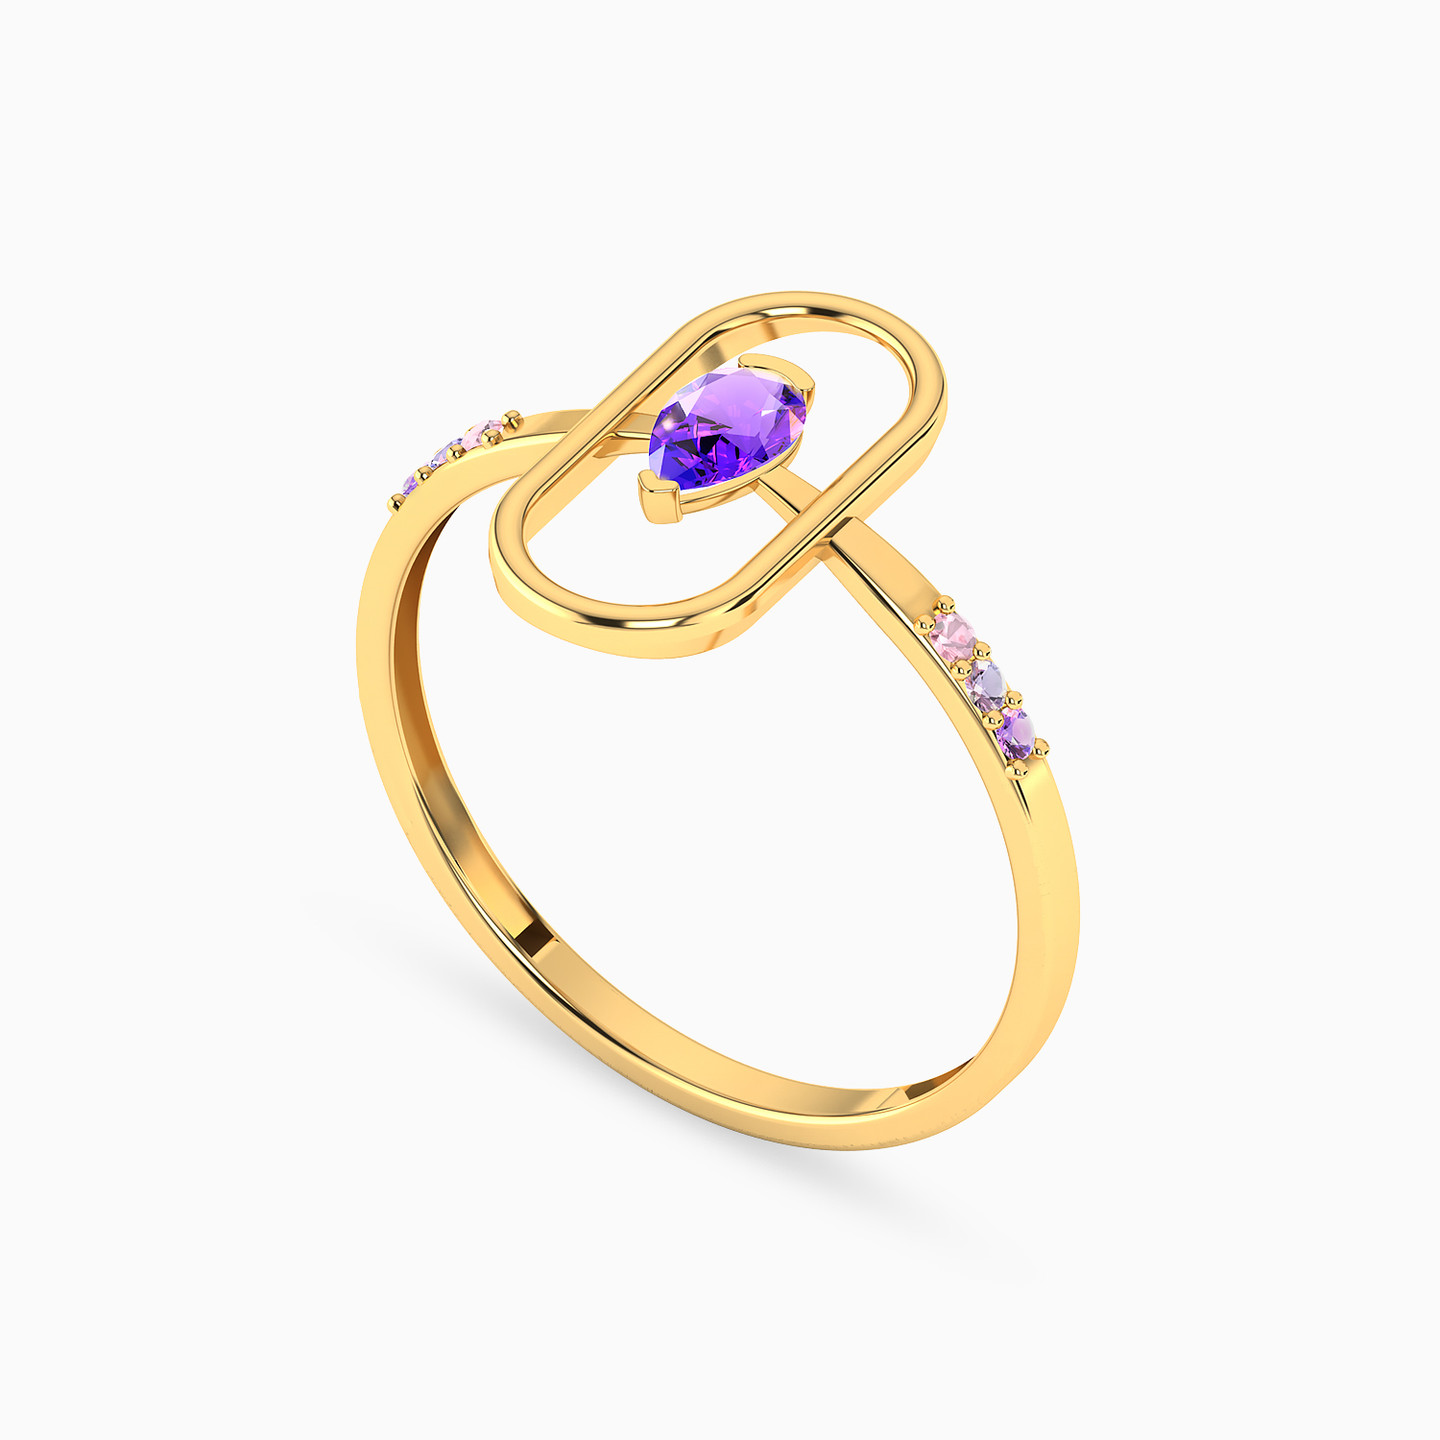 18K Gold Colored Stones Statement Ring - 2